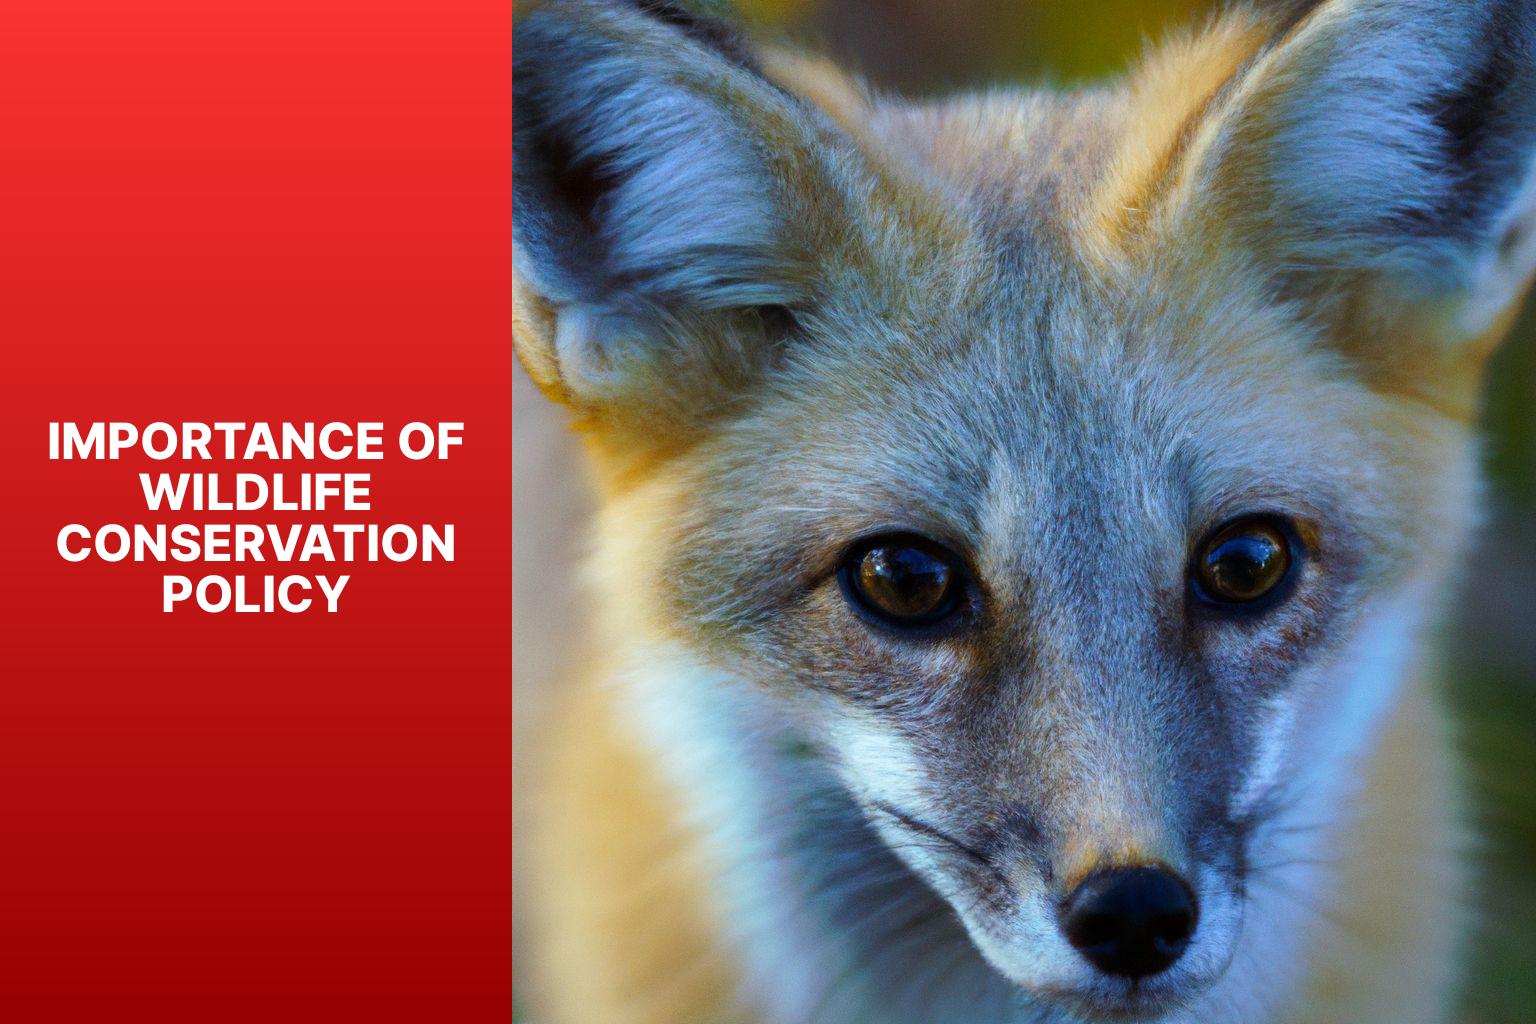 Importance of Wildlife Conservation Policy - Kit Fox in Wildlife Conservation Policy 